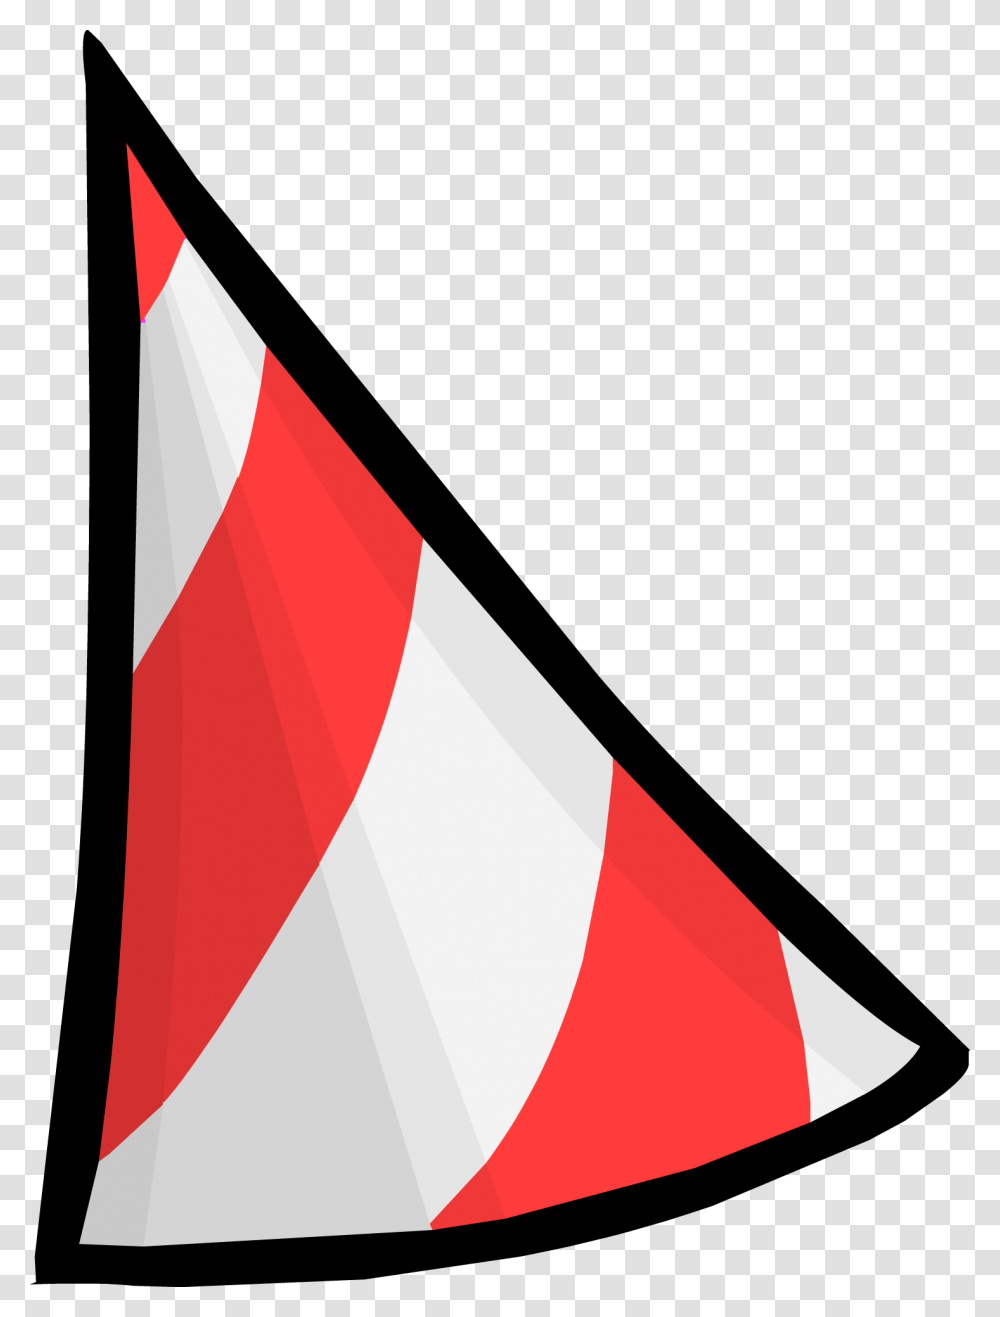 Club Penguin Rewritten Wiki Flag, Apparel, Party Hat Transparent Png